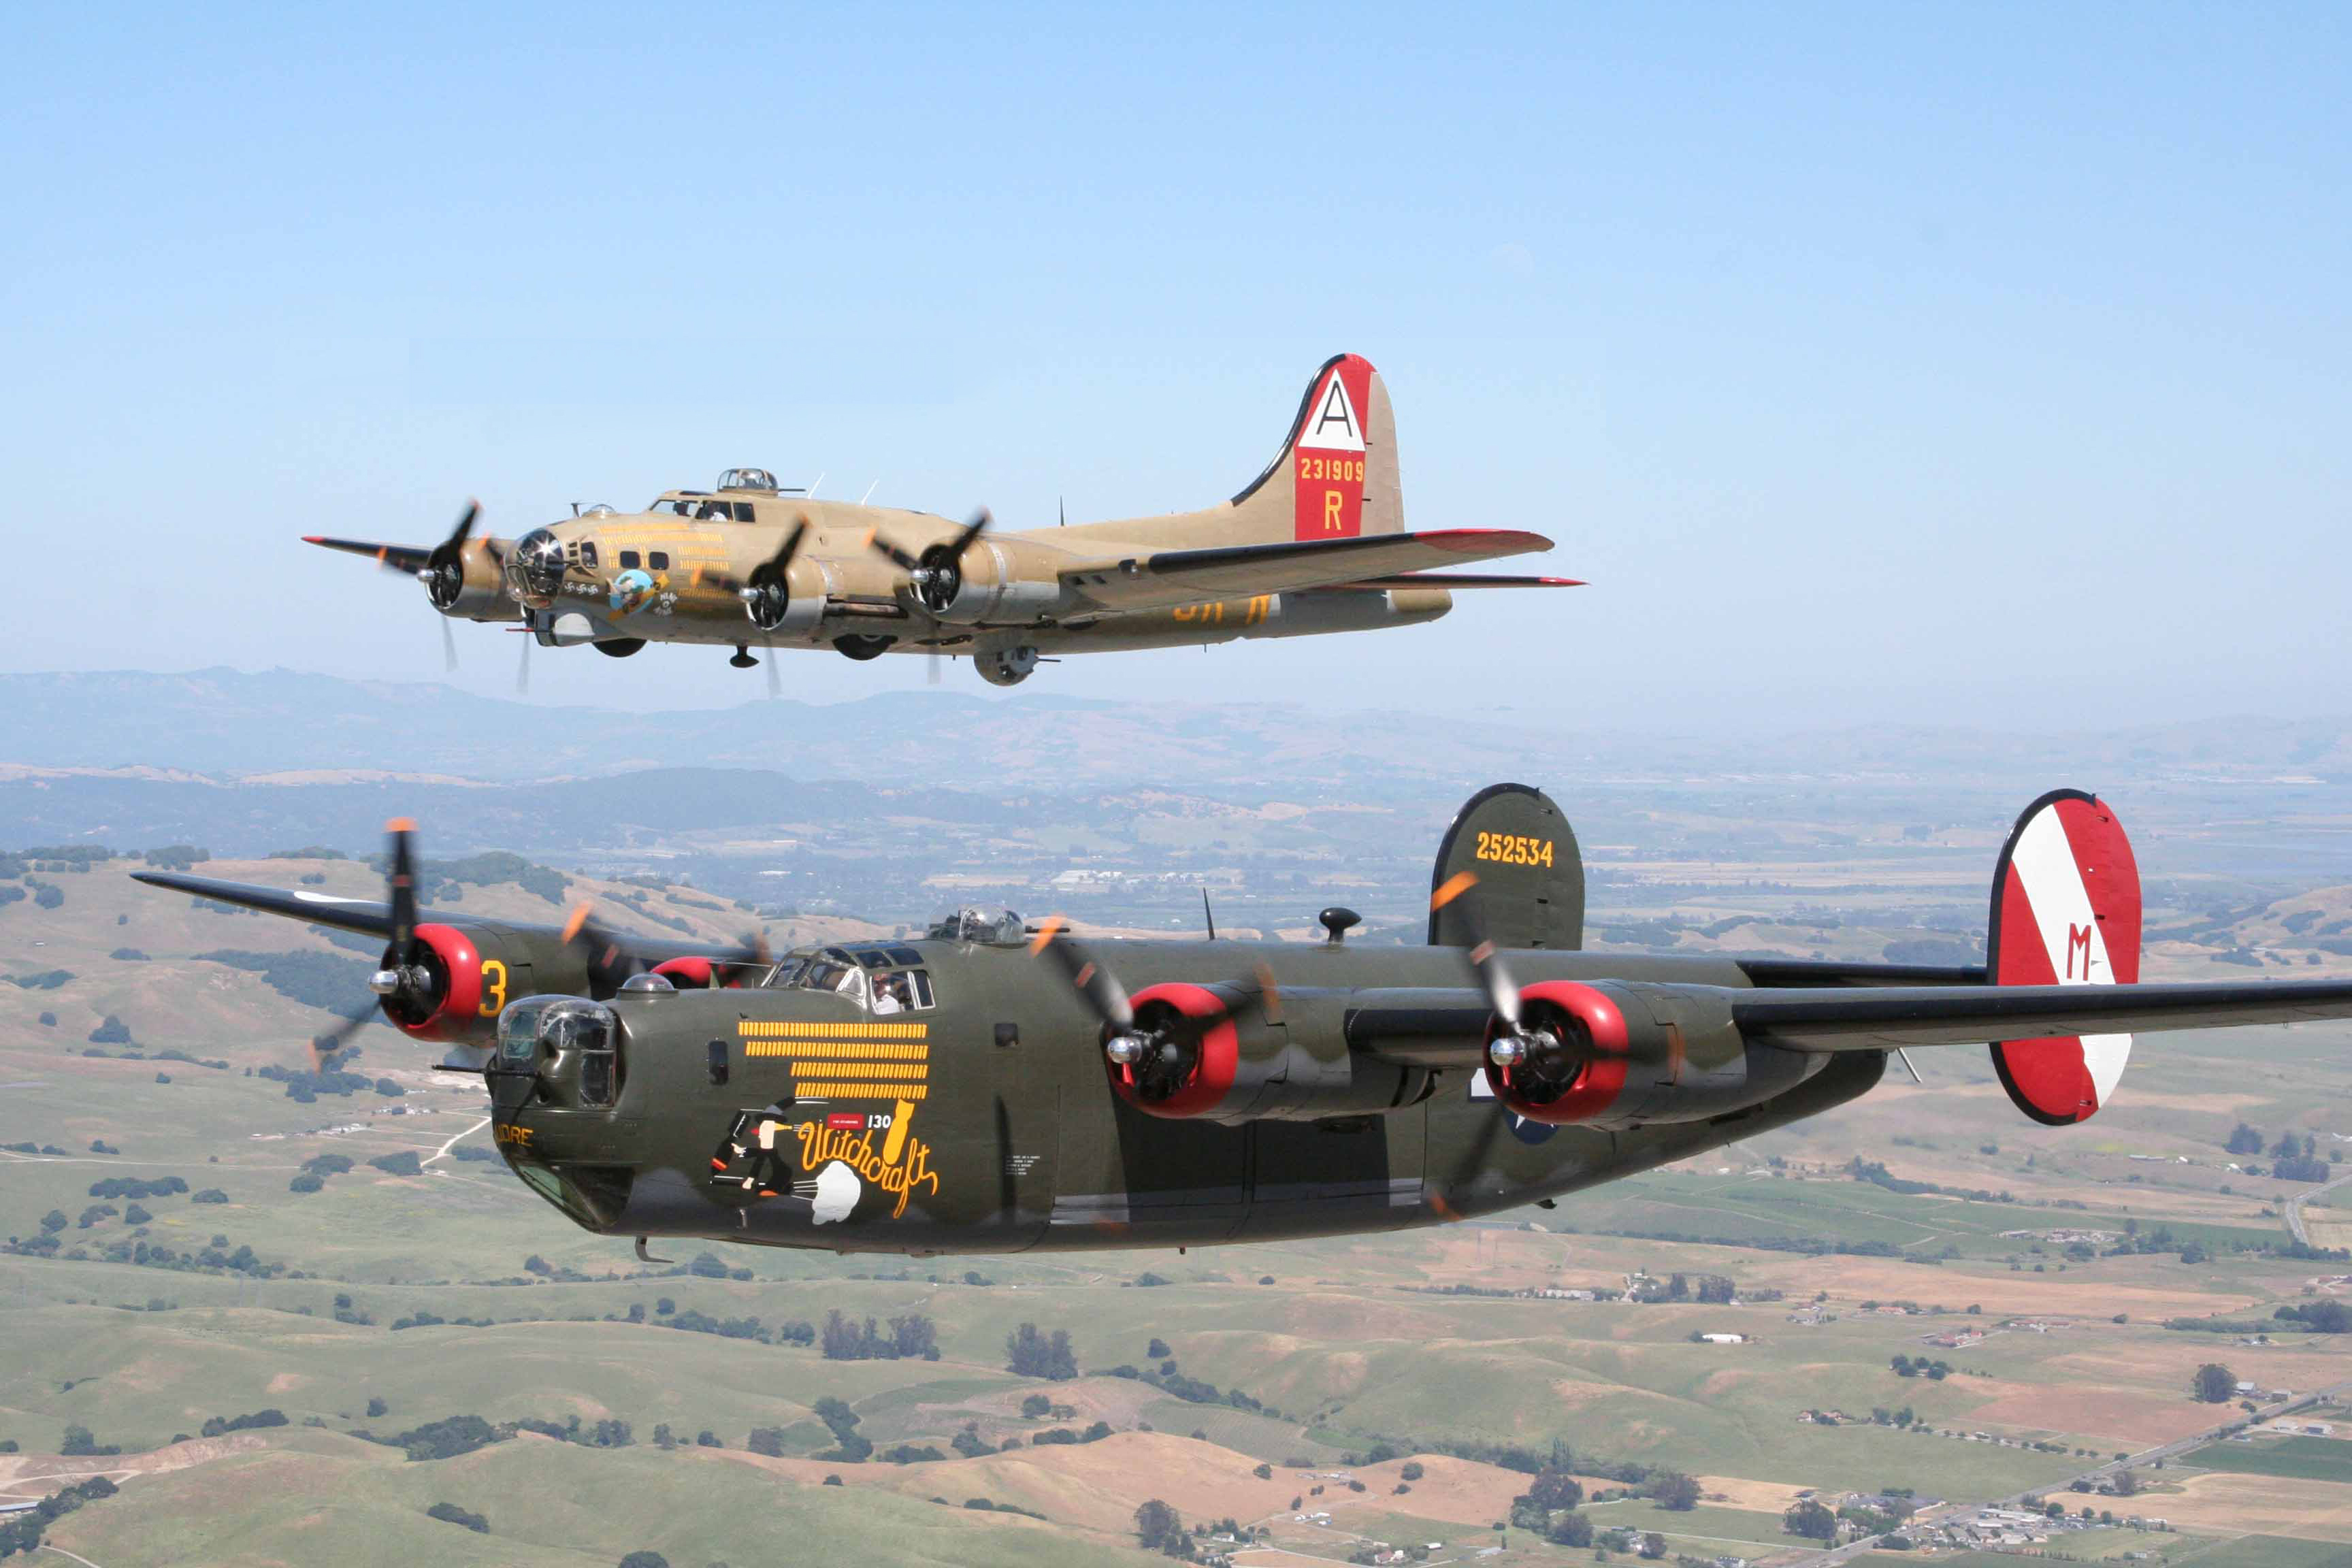 The Foundation’s 1944 vintage Consolidated B-24J Liberator is painted as "Witchcraft", an 8th AF bomber that flew a record 130 missions over Europe as part of the 467 th BG. The Boeing B-17G Flying Fortress flies as "Nine-O-Nine", an 8 th Air Force, 91 st BG heavy bomber. ( Image by Collings Foundation)